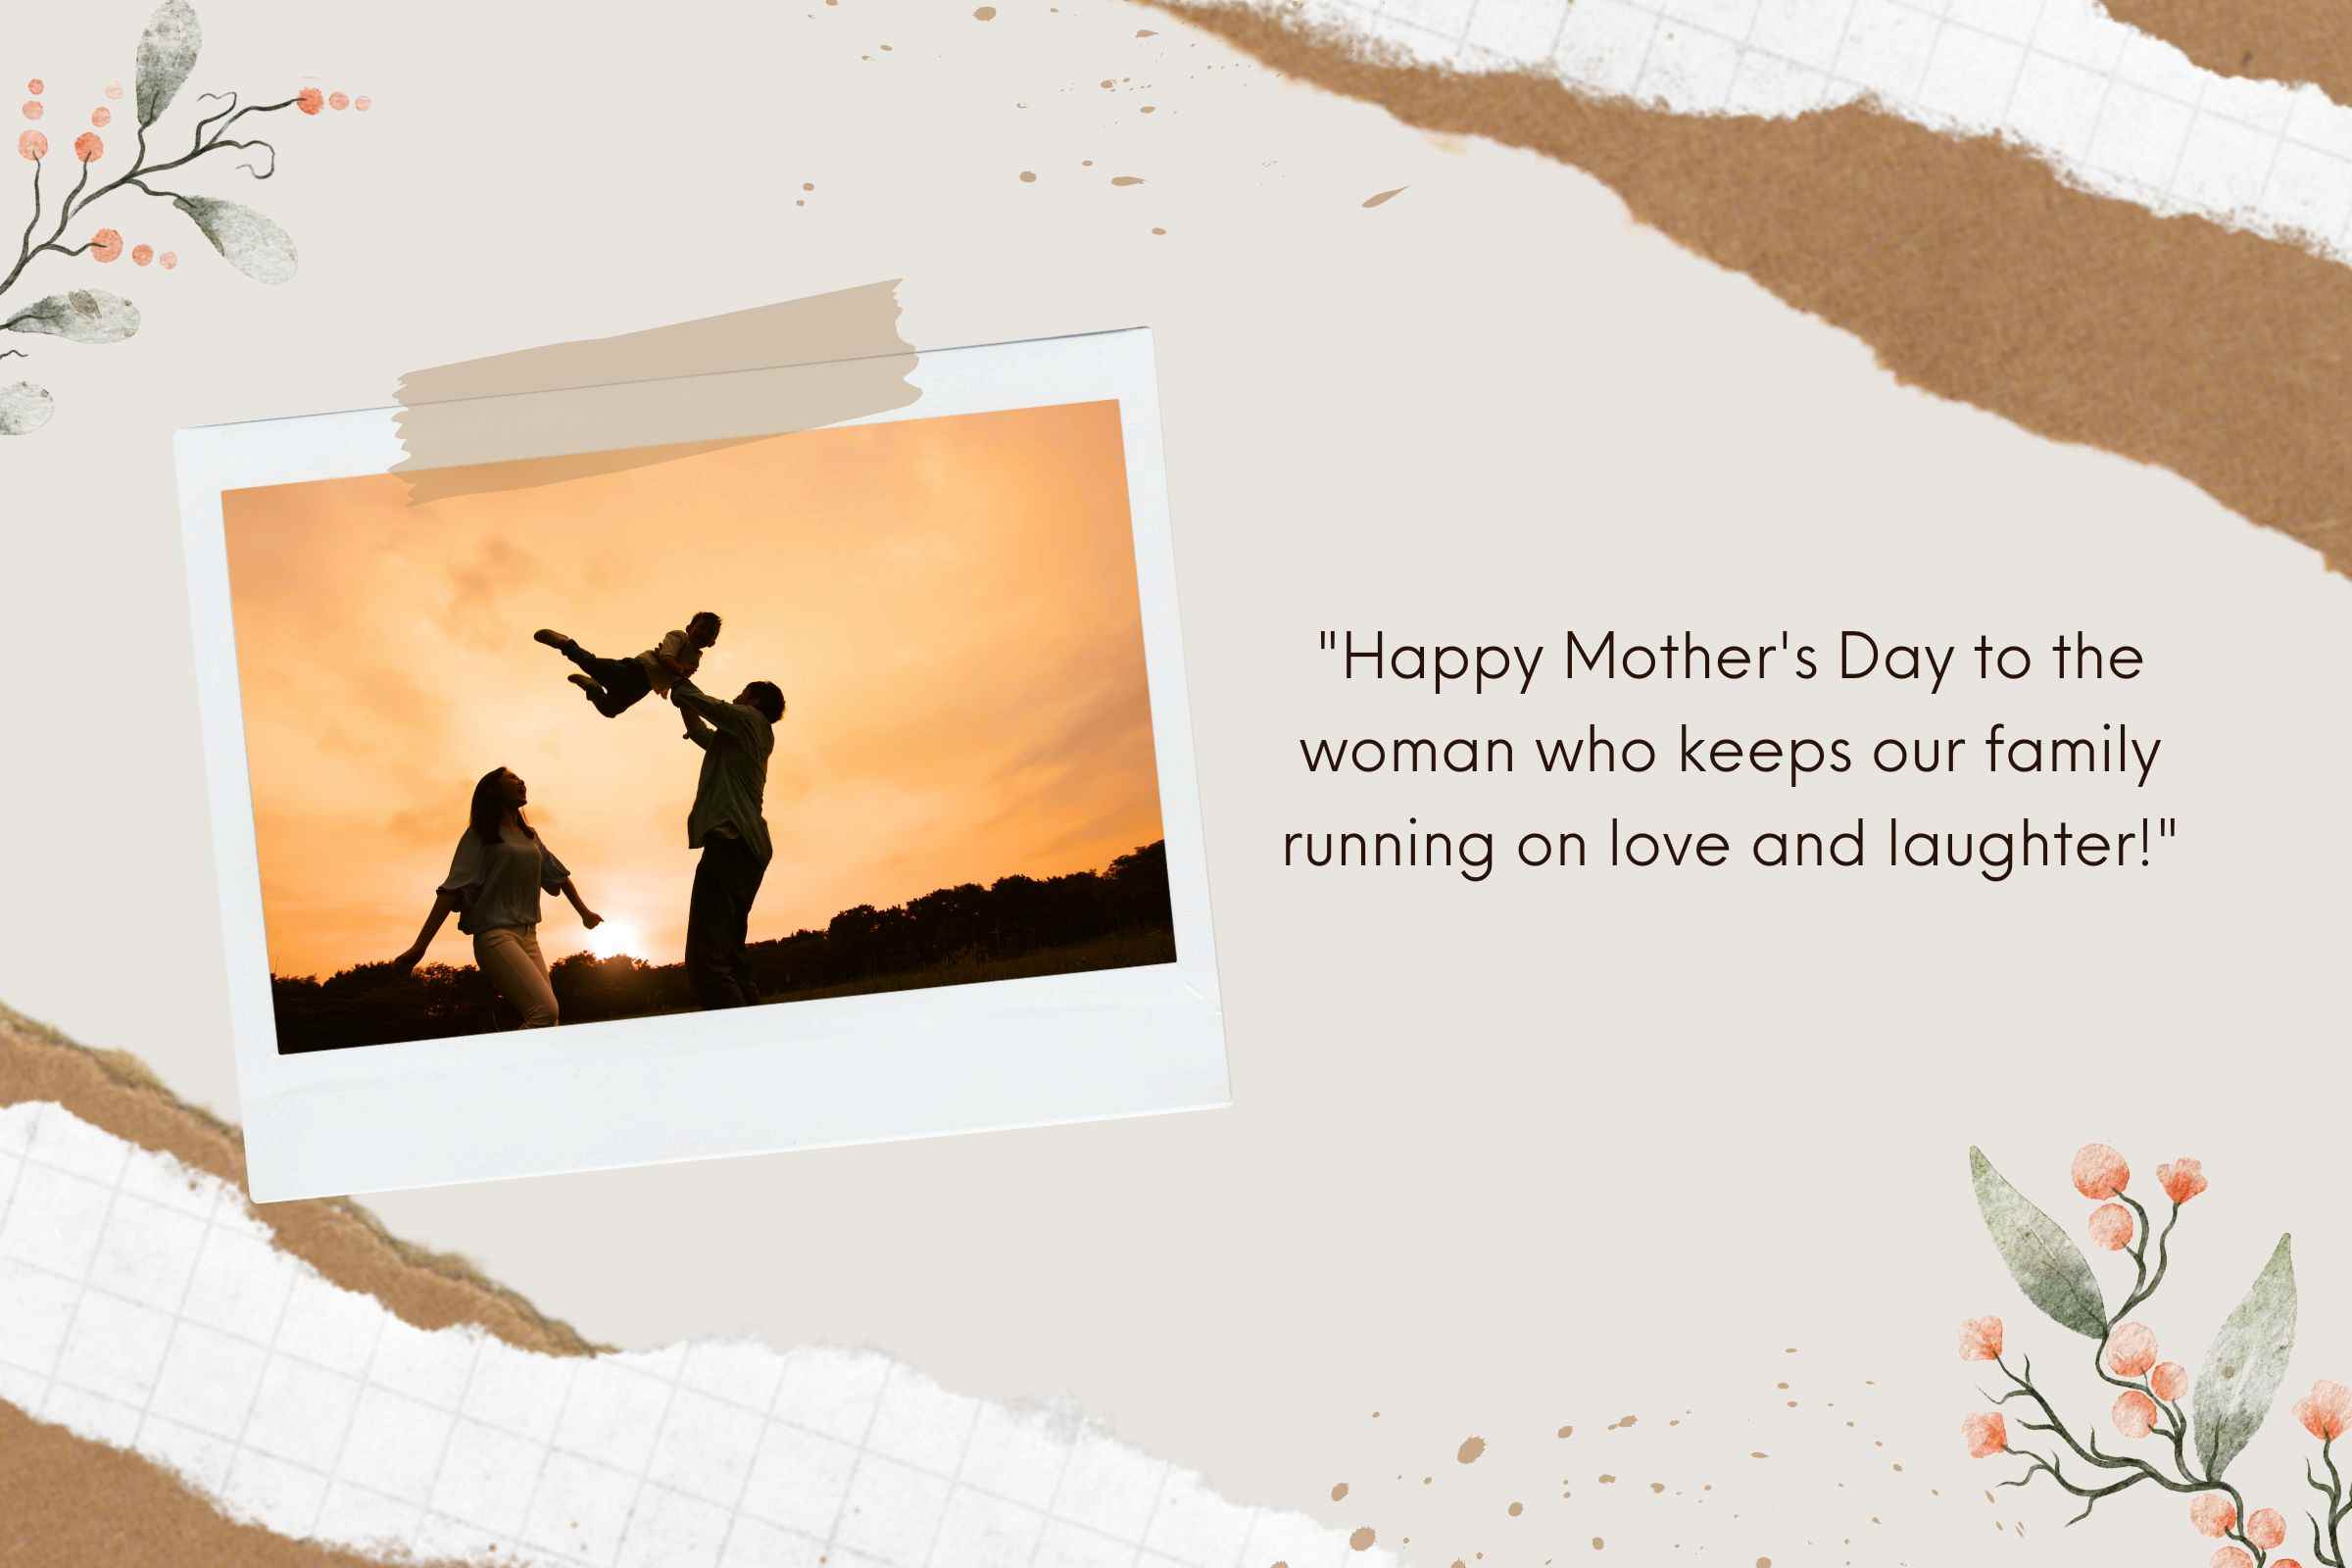 Funny mothers day quotes from husband to wife - Funny Mothers Day Quotes from Husband to Wife: "Happy Mother's Day to the woman who keeps our family running on love and laughter!"